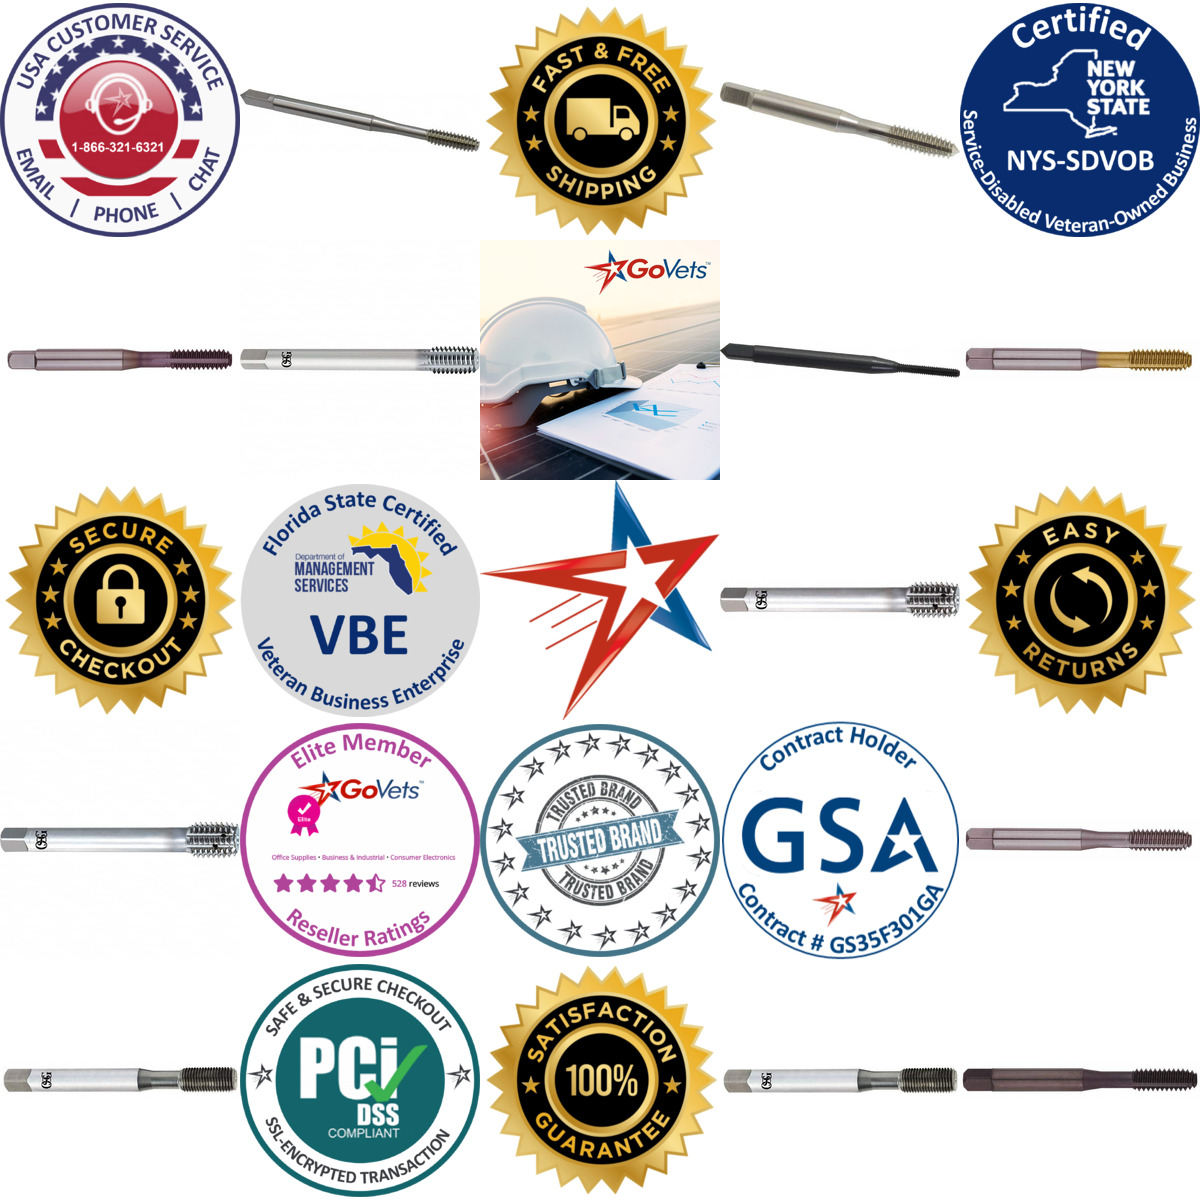 A selection of Osg products on GoVets